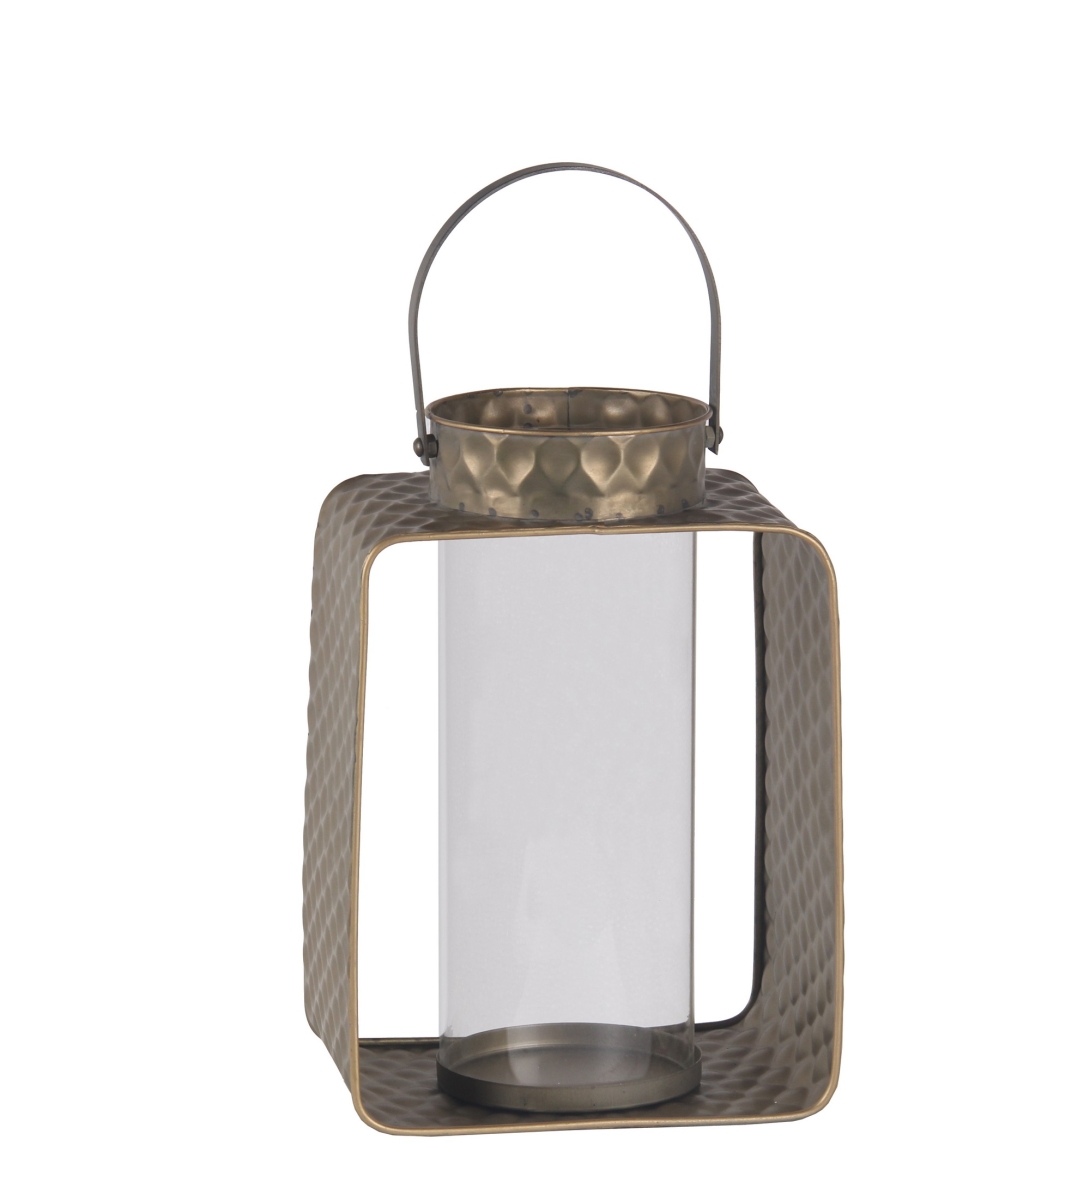 21067 5.5 X 5.5 X 12.5 In. Hammered Metal Lantern - Small